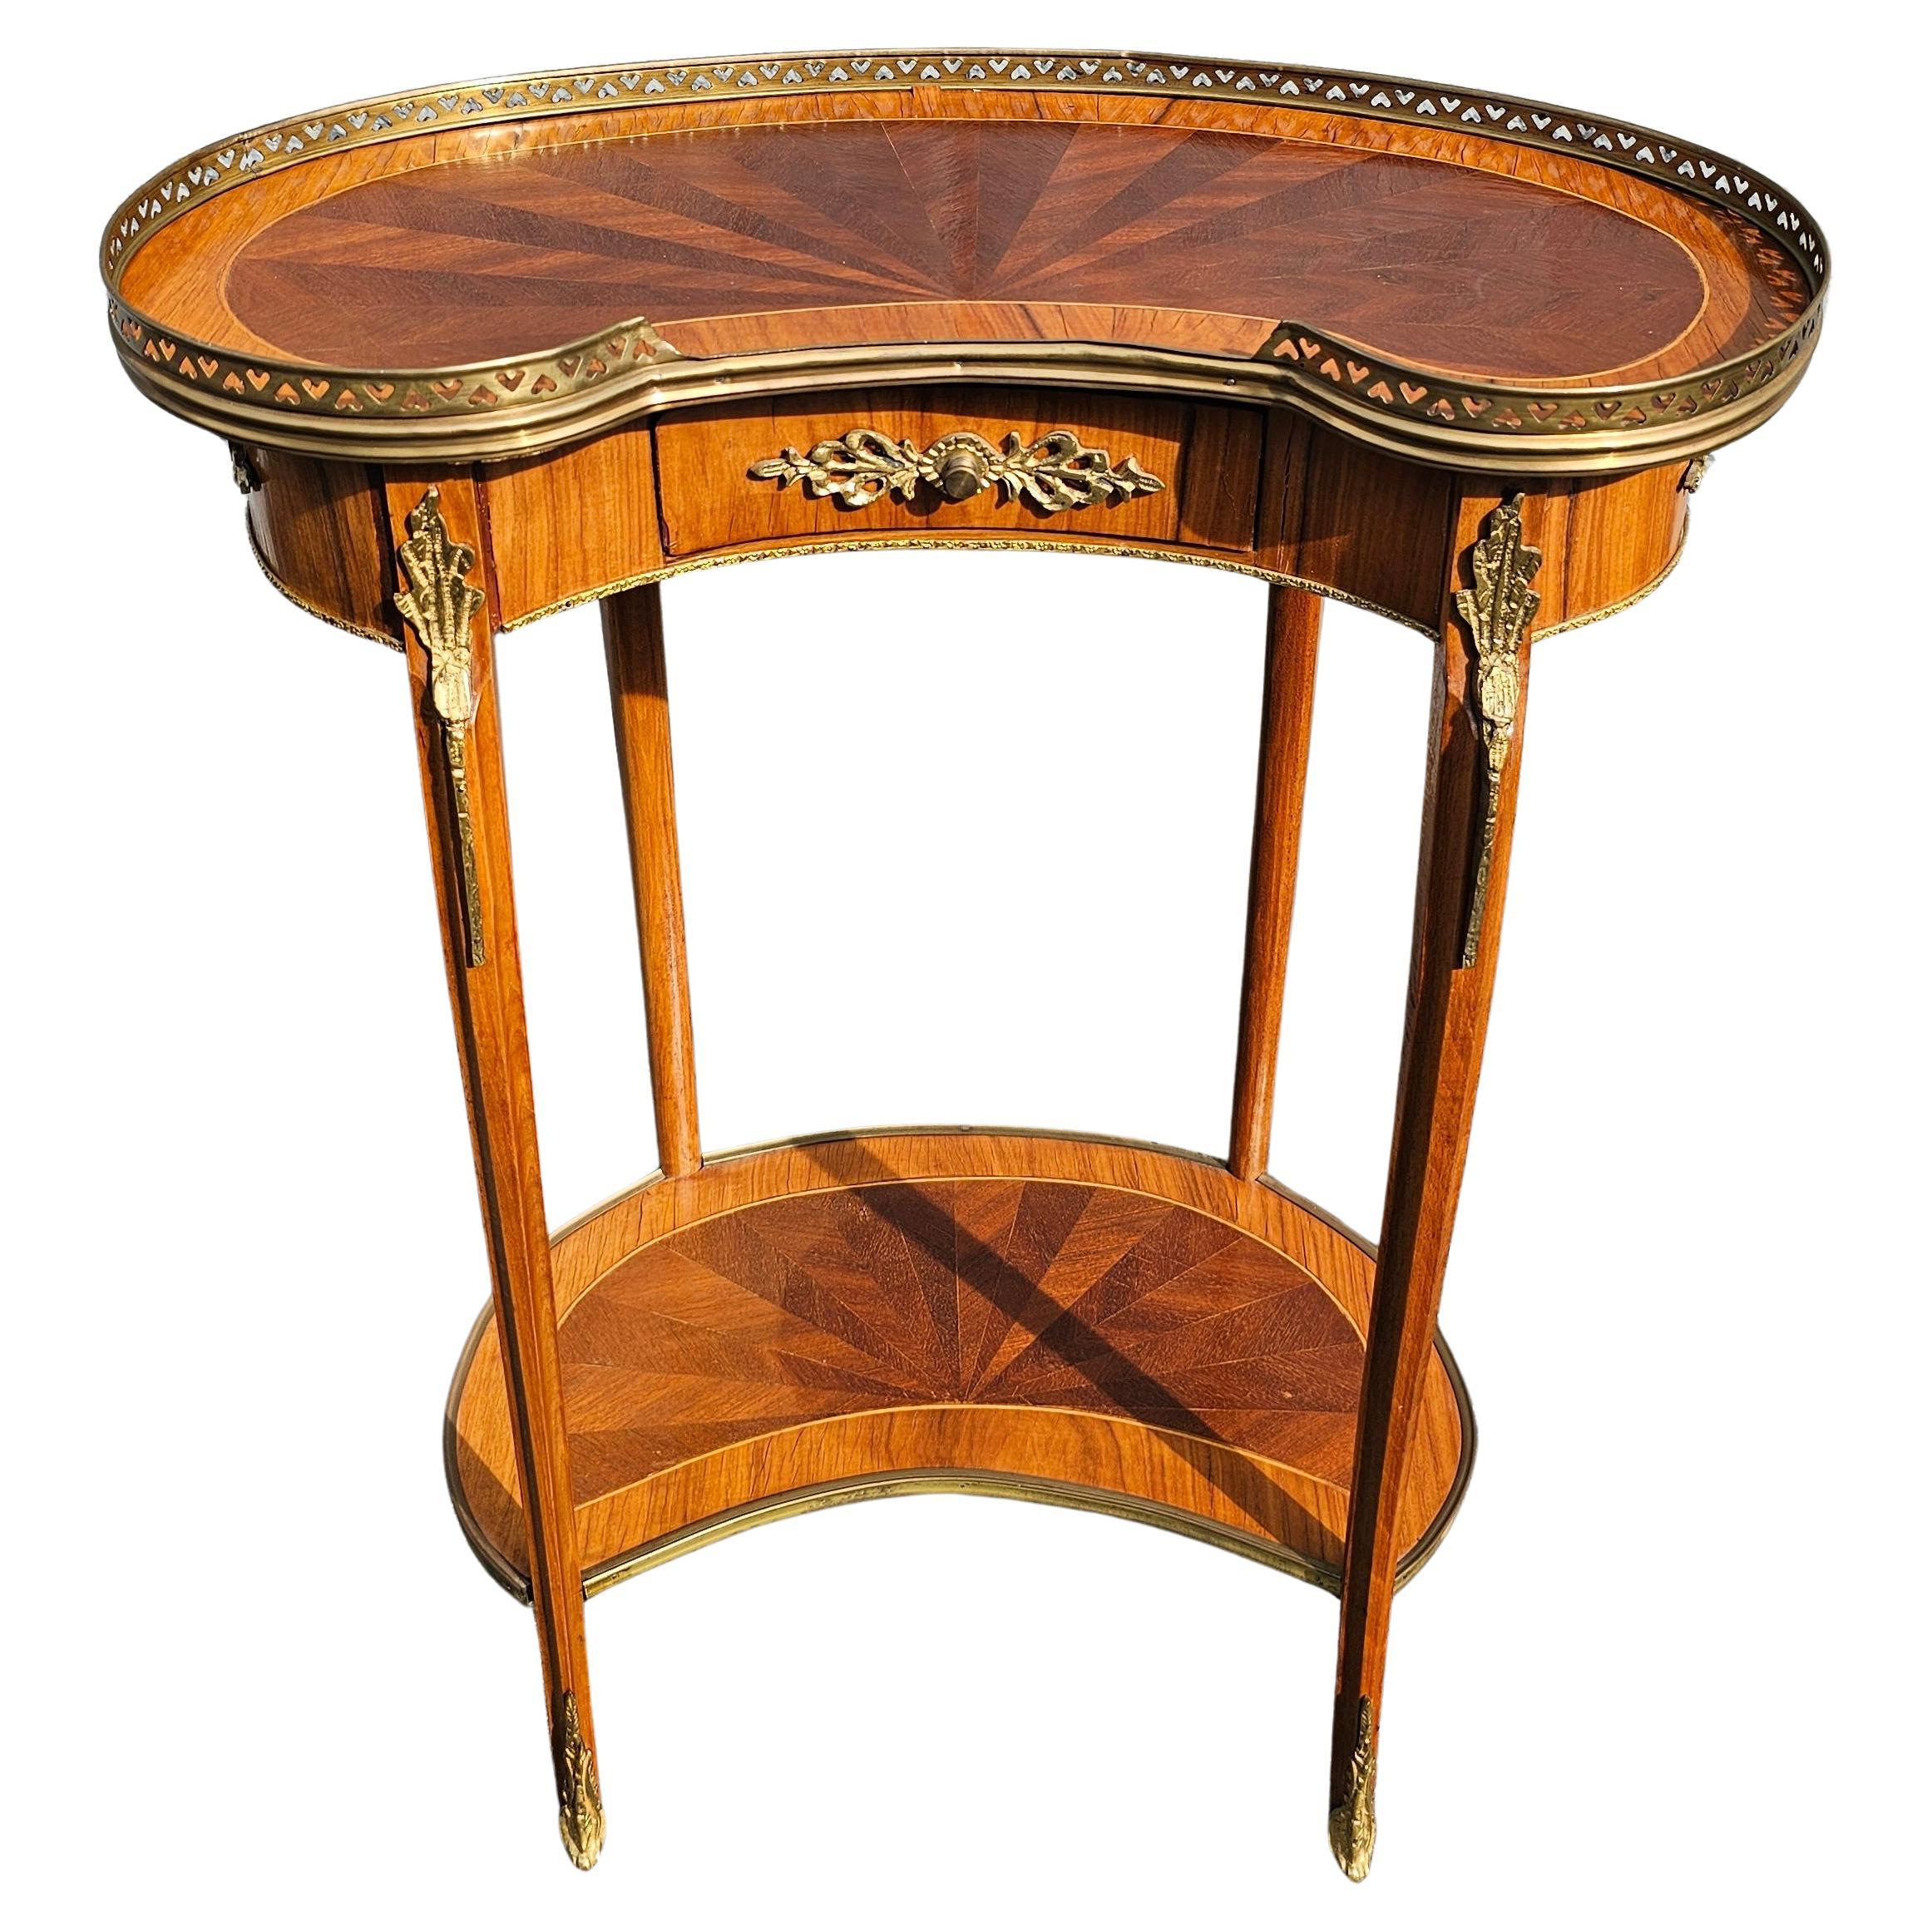 Marquetry Pair Louis XV Ormolu Mounted Galleried Tulipwood And Kingwood Table Ambulante For Sale